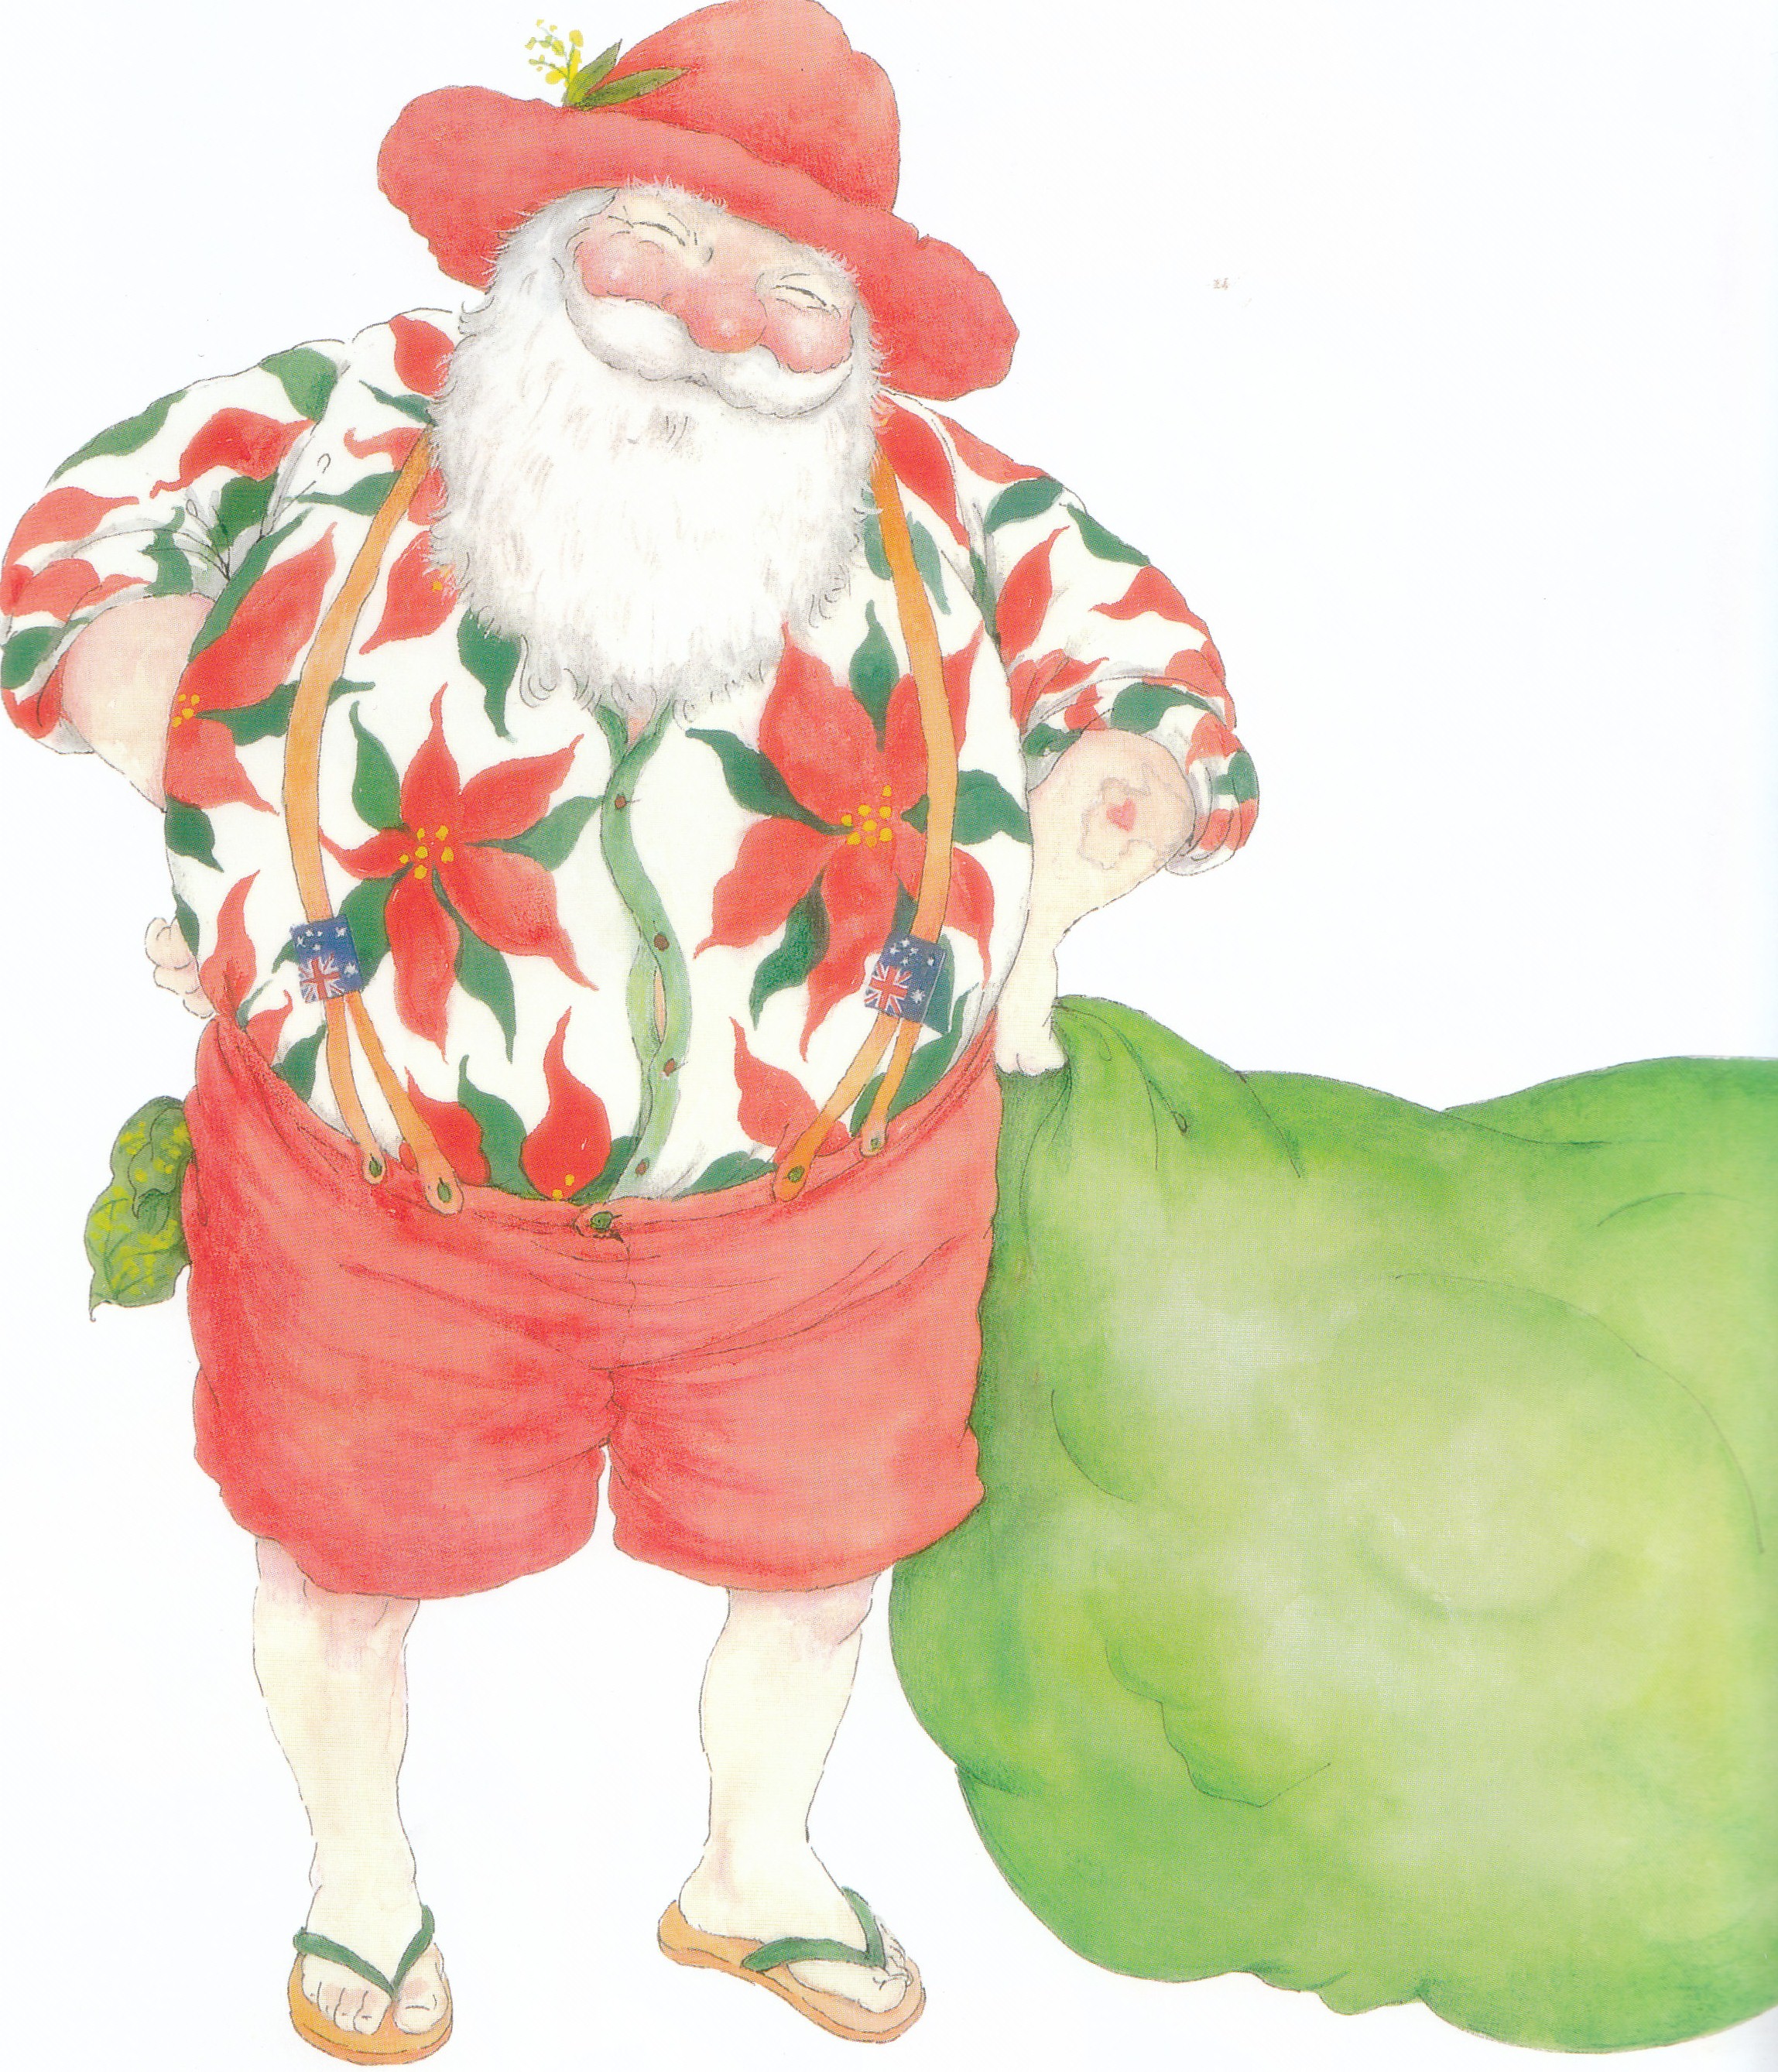 From the book "Aussie Night Before Christmas" by Yvonne Morrison, available at ABC shops